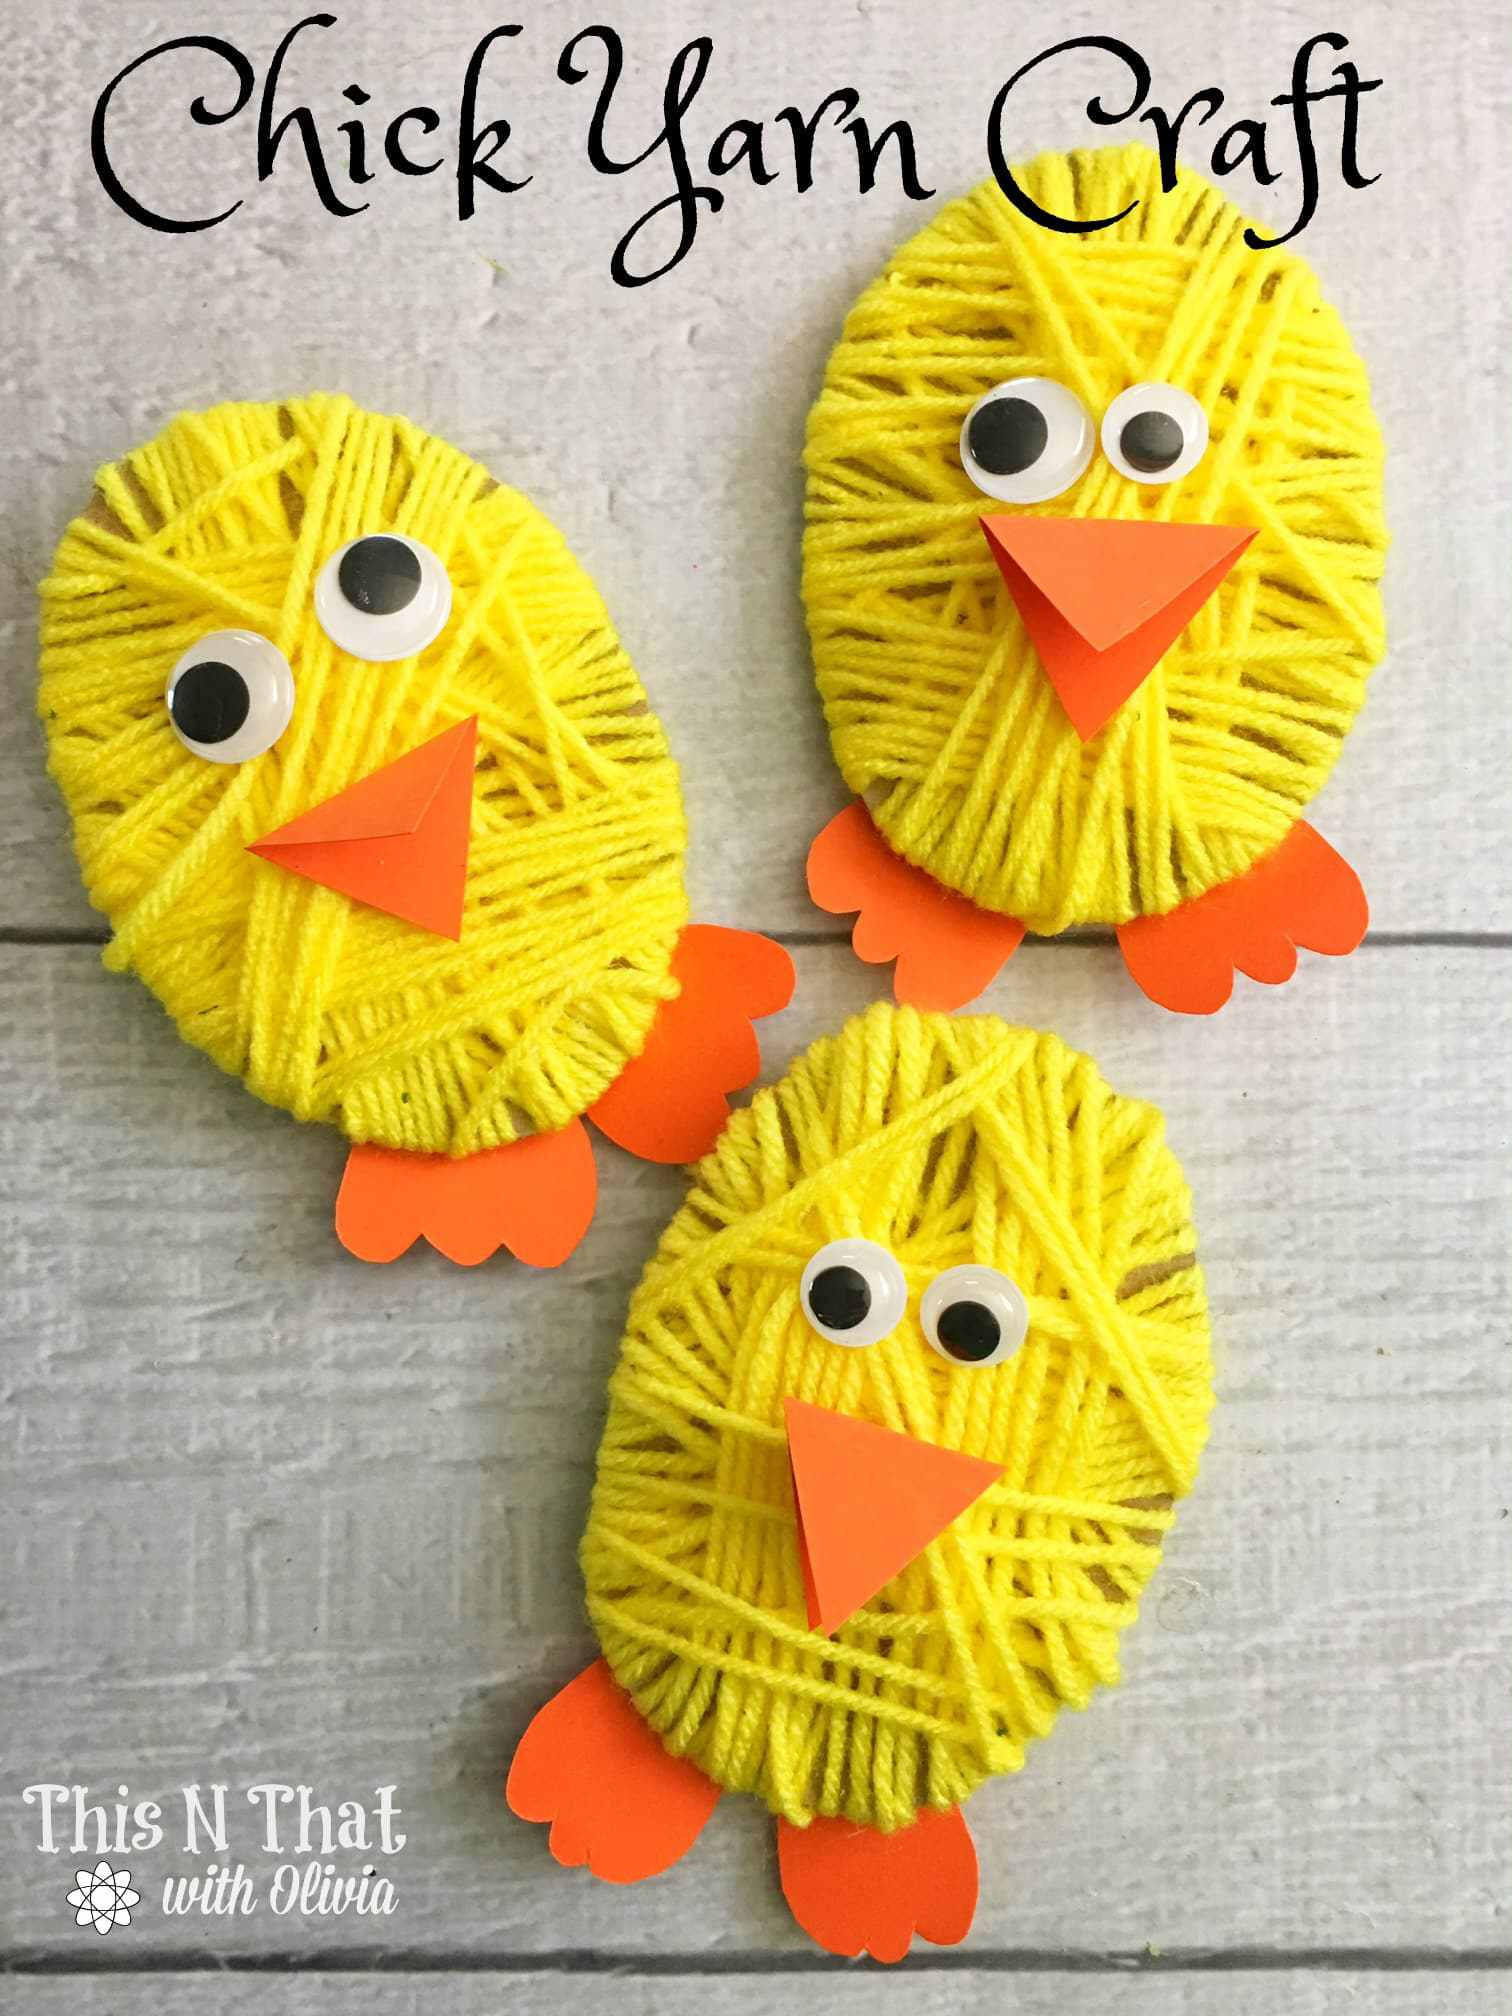 Toddlers Arts And Crafts Ideas
 Over 33 Easter Craft Ideas for Kids to Make Simple Cute